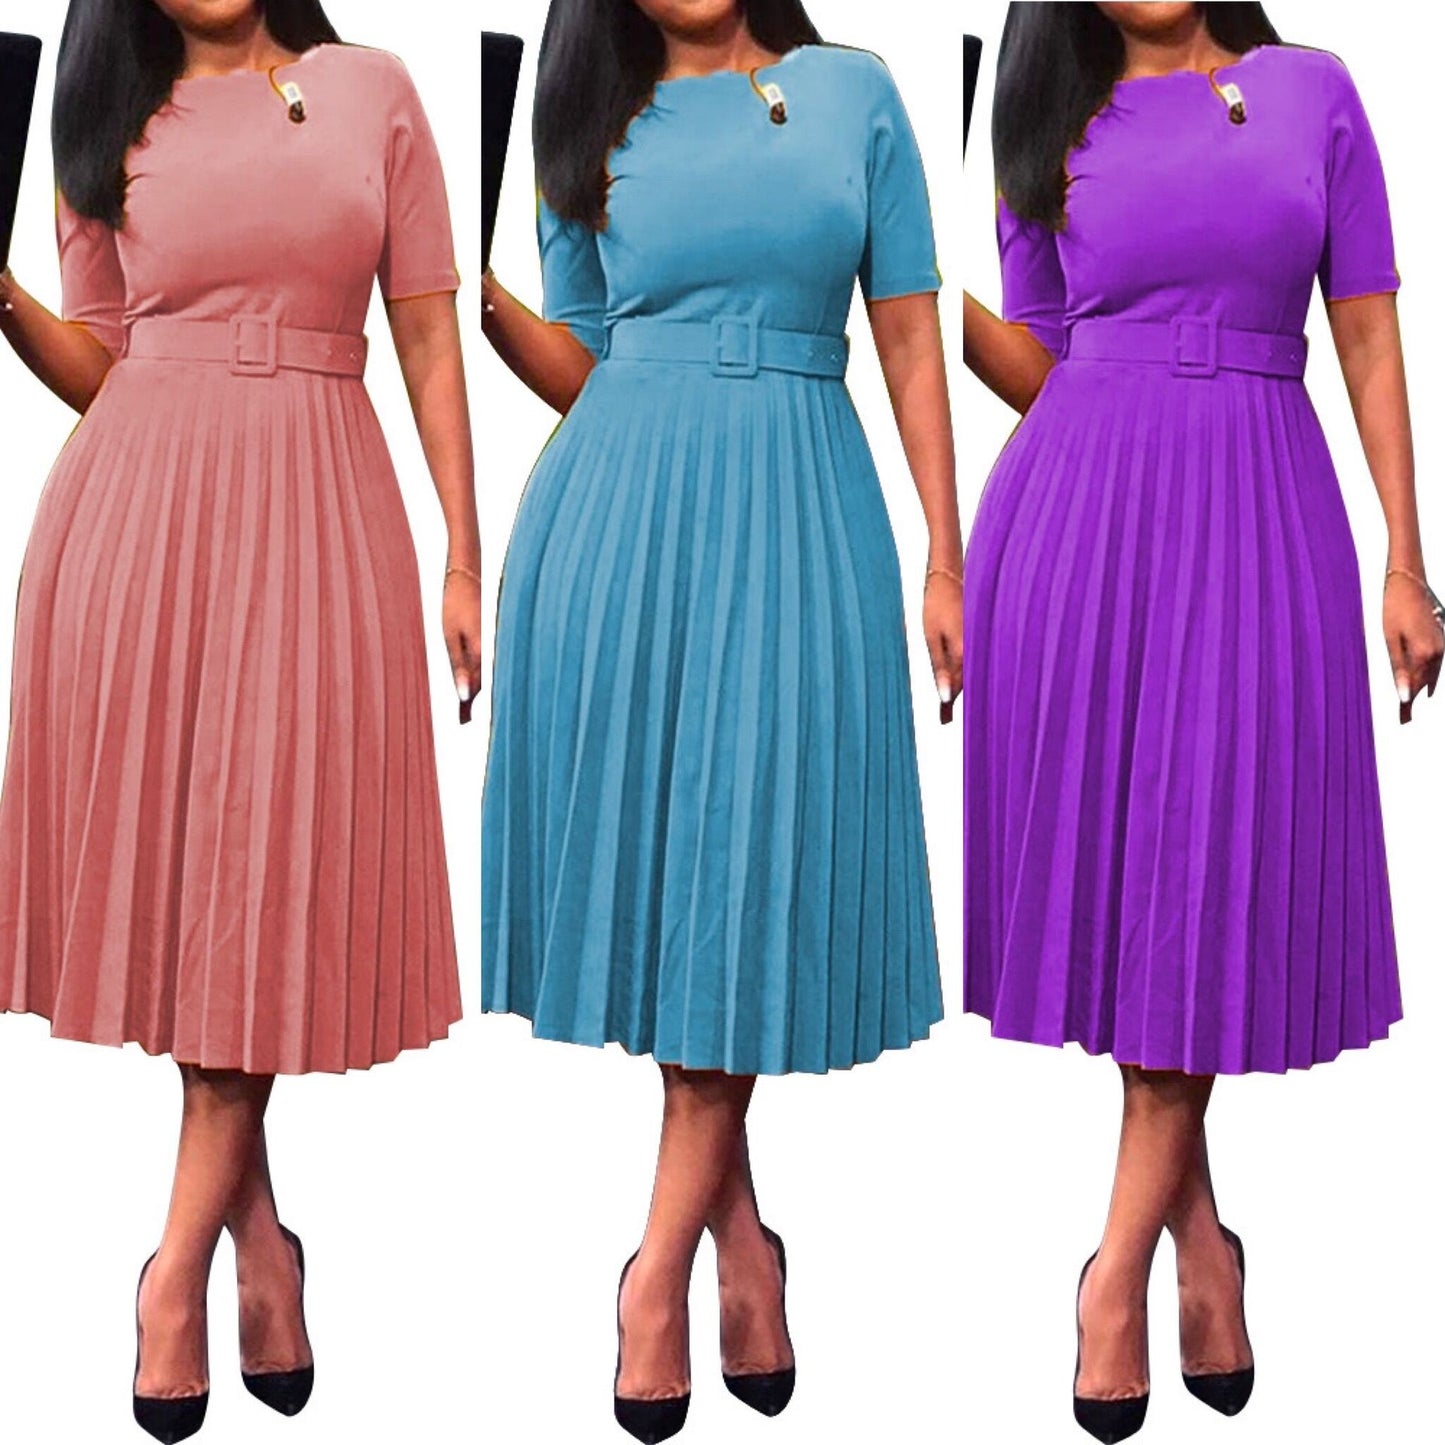 Women's dresses in American and African solid color with pleated skirts and waistbands are in stock